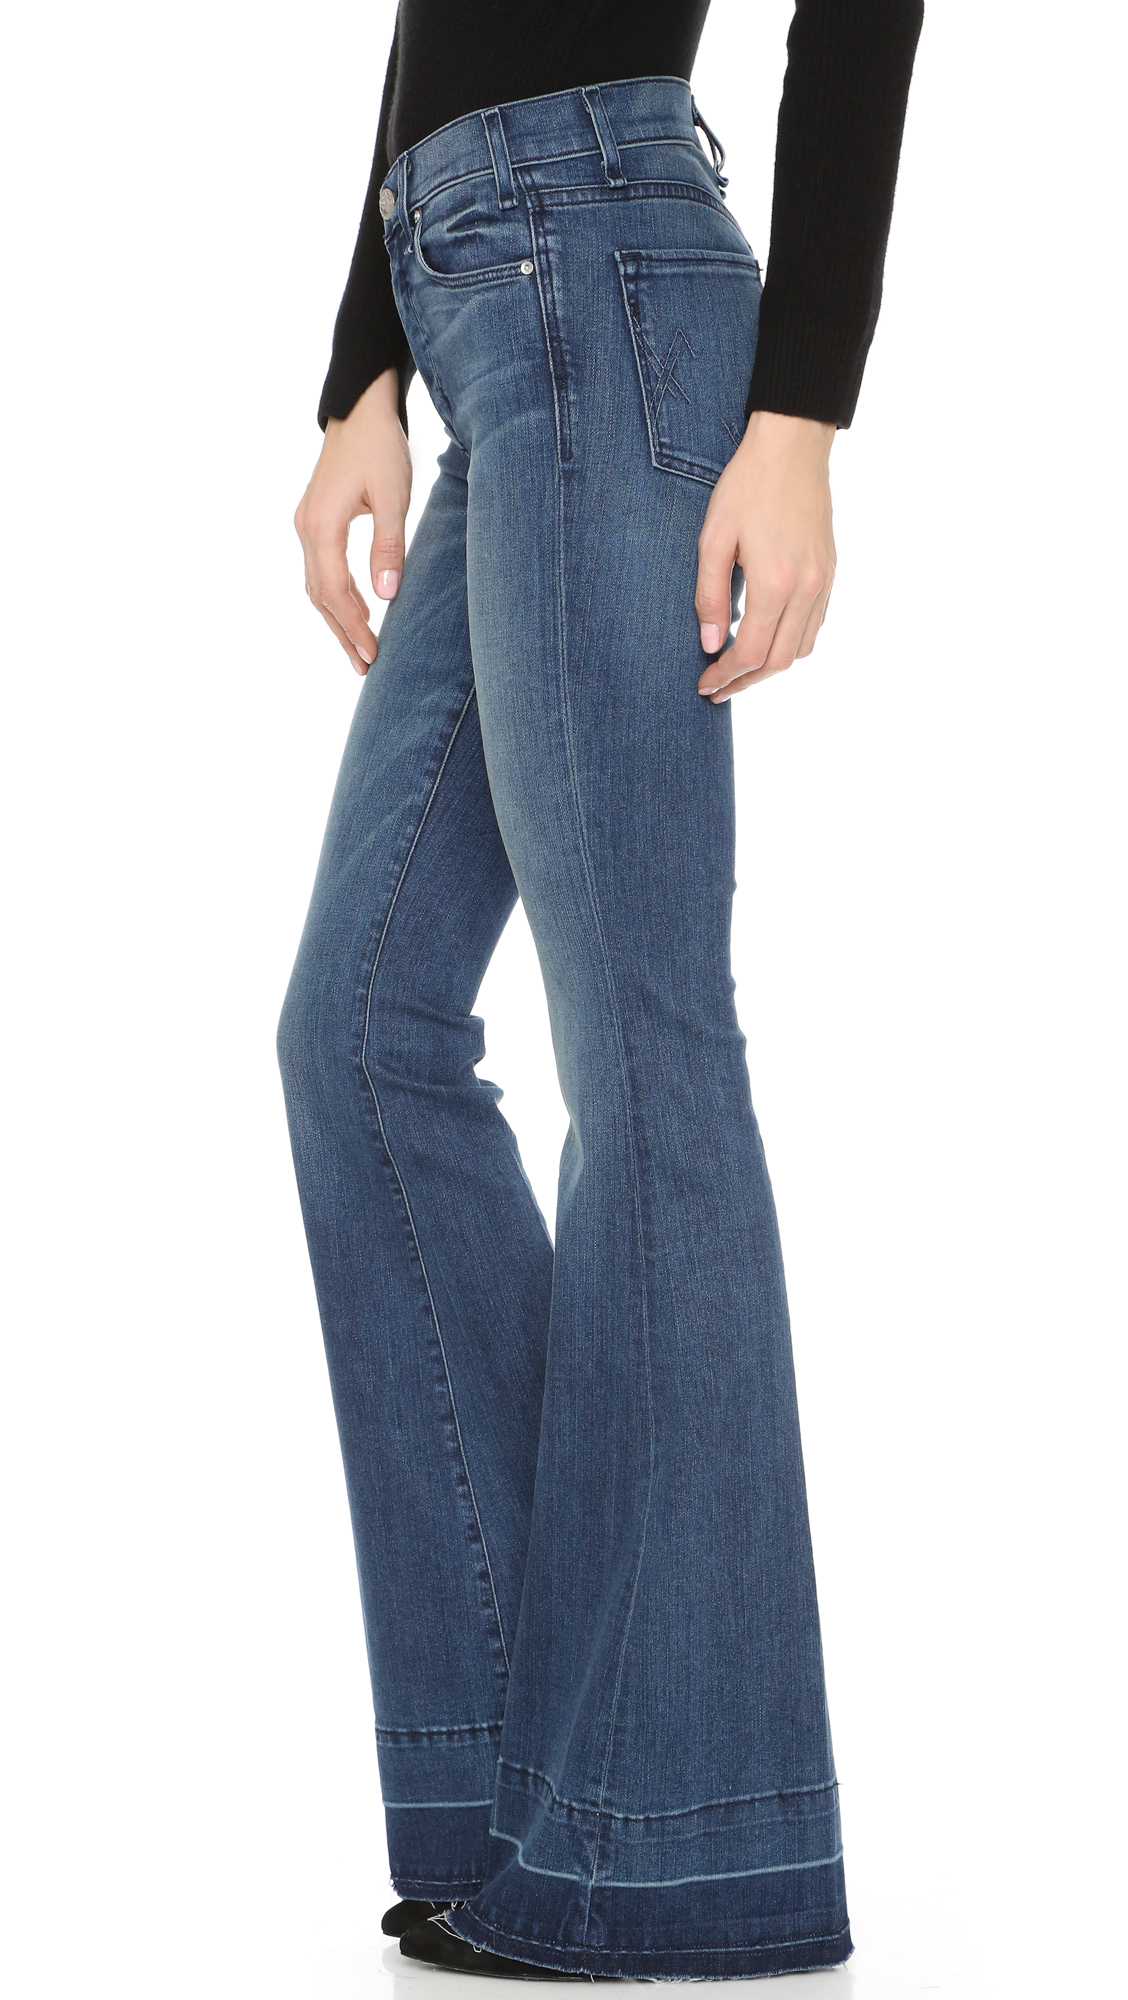 Lyst - Mcguire Denim Majorelle Flare Jeans in Blue